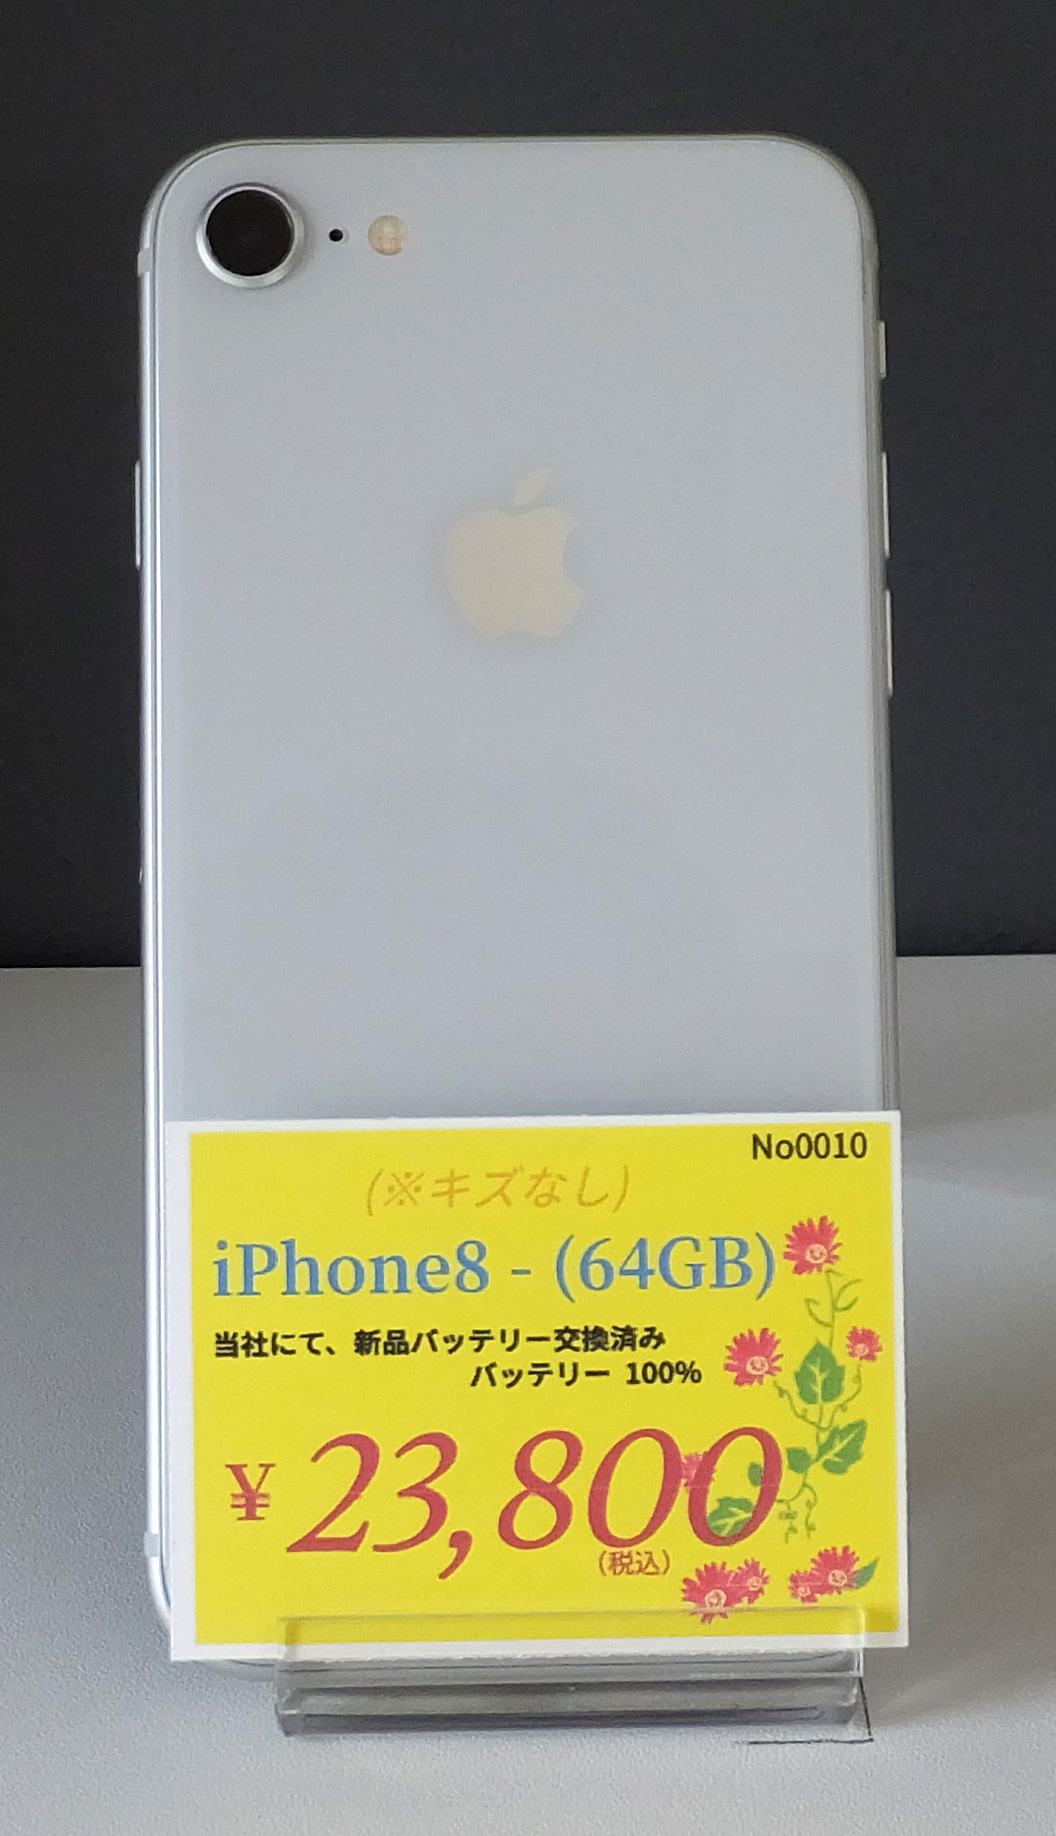 iPhone XR 64gb ほぼ新品！！ バッテリー容量100%-